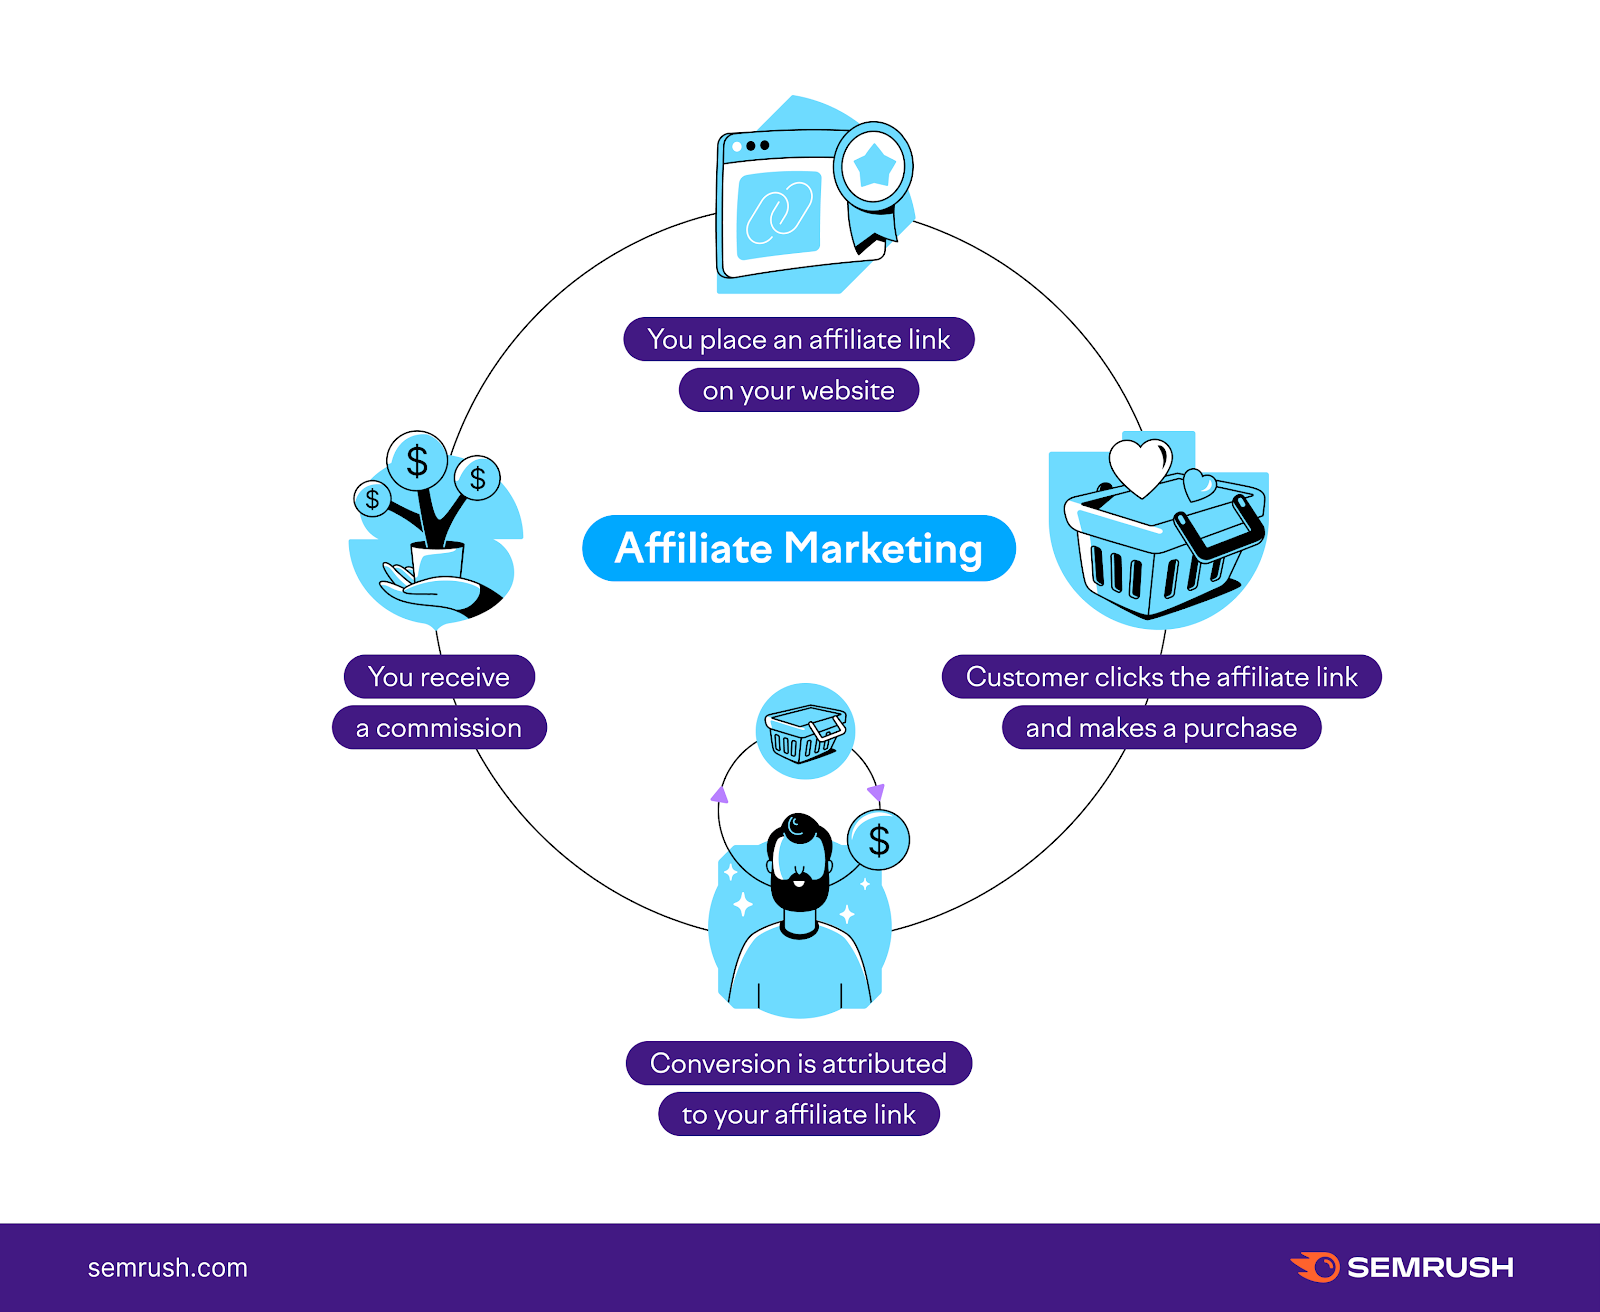 An infographic showing how affiliate marketing works